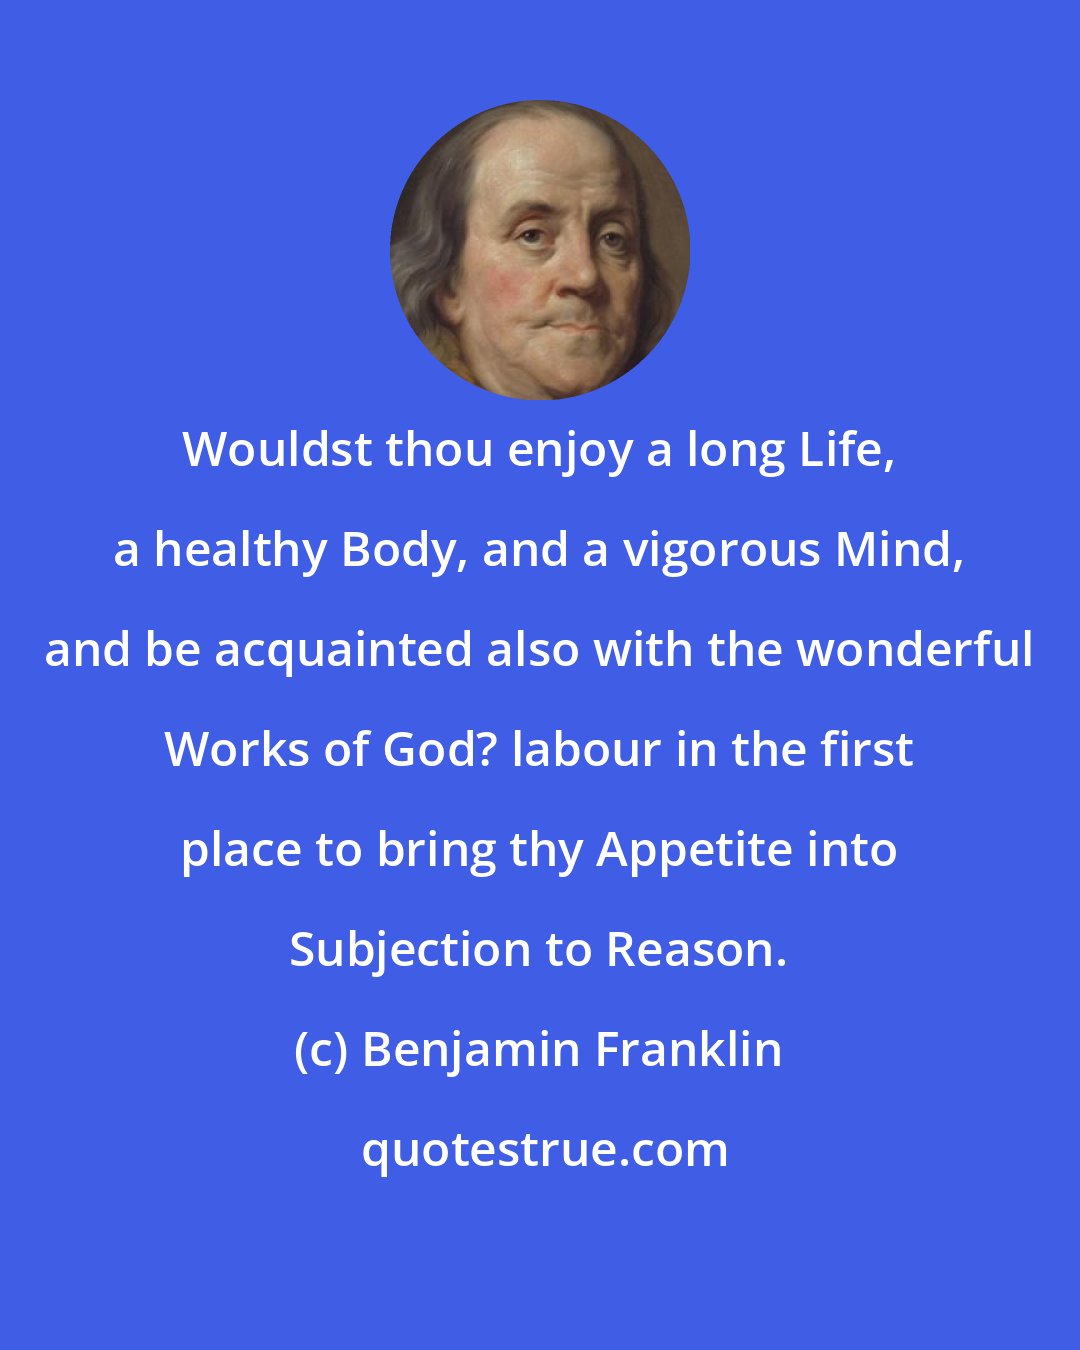 Benjamin Franklin: Wouldst thou enjoy a long Life, a healthy Body, and a vigorous Mind, and be acquainted also with the wonderful Works of God? labour in the first place to bring thy Appetite into Subjection to Reason.